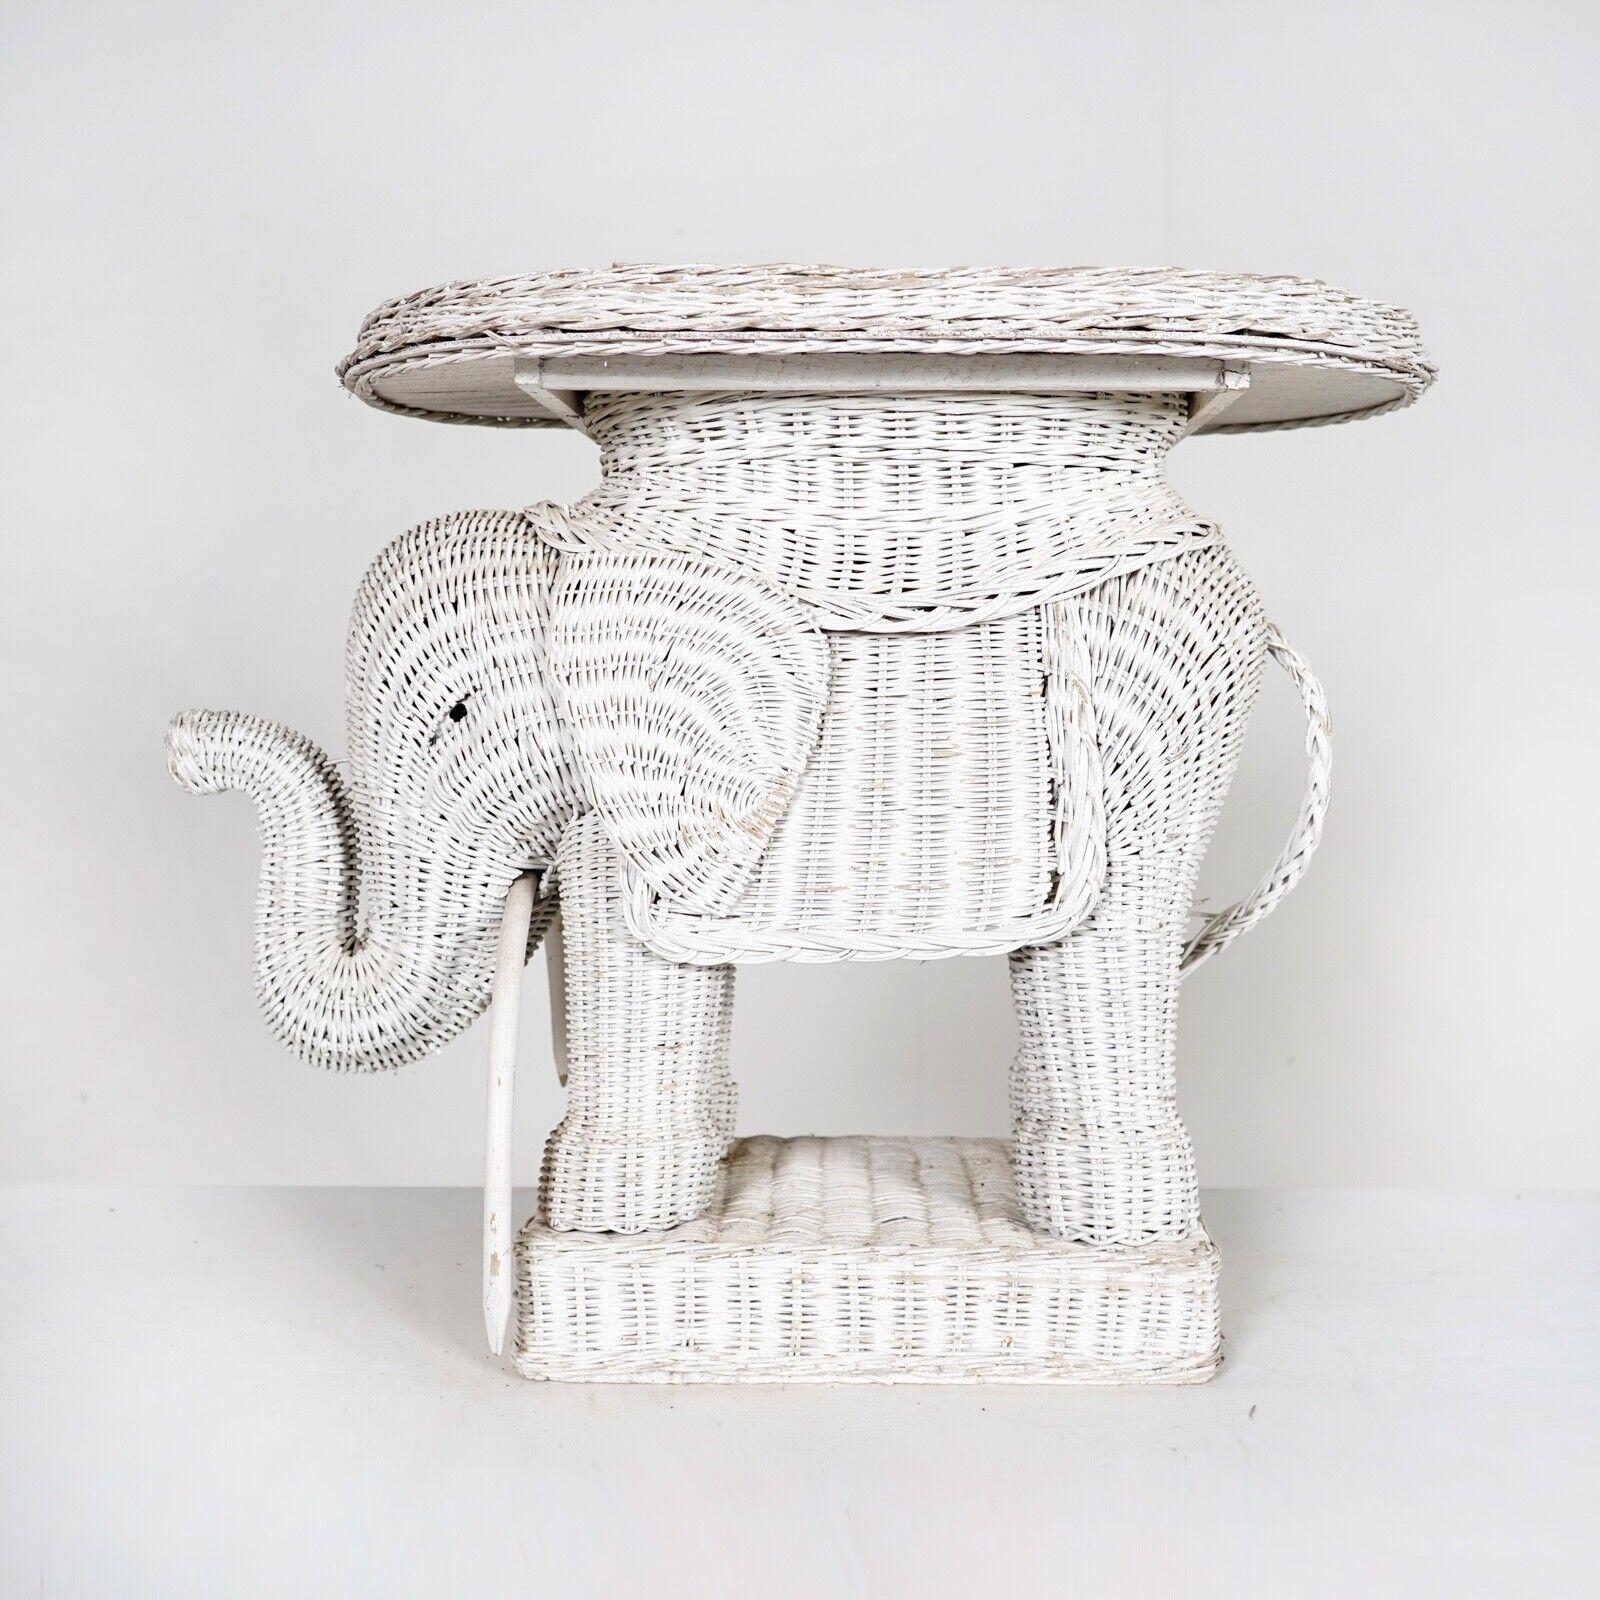 An original vintage wicker elephant table with removable tray.

Can be used as a coffee table or fun little side table.

Condition 
Please do take a careful look at all our pictures and note that these are antique or vintage pieces that will show